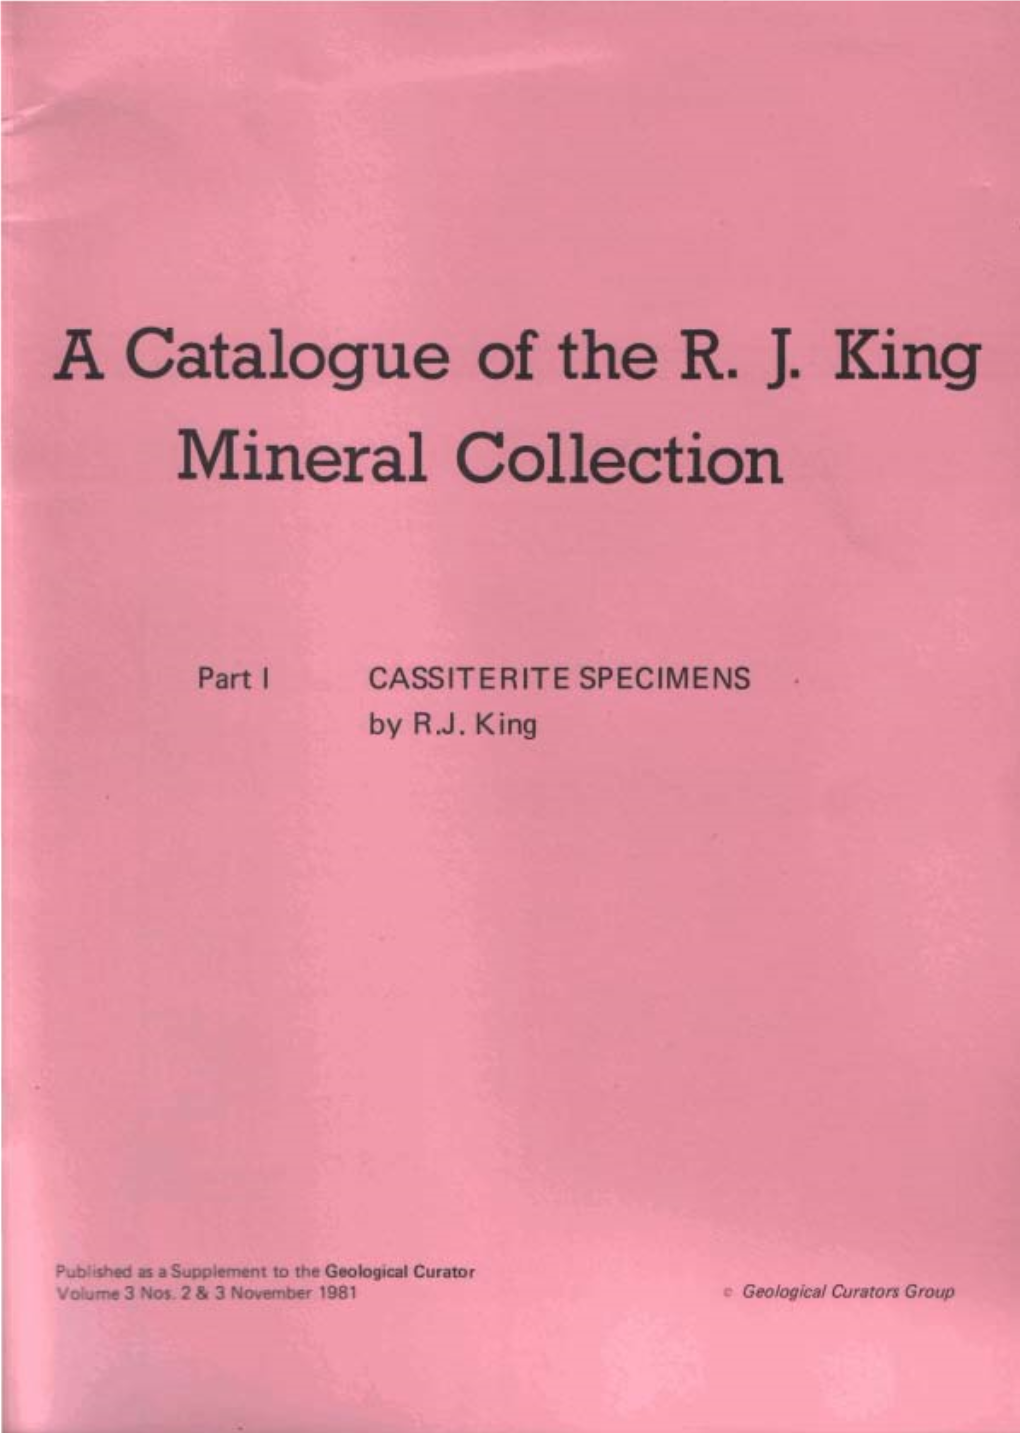 1Catalogue of the R. J. King Mineral Collect Ion